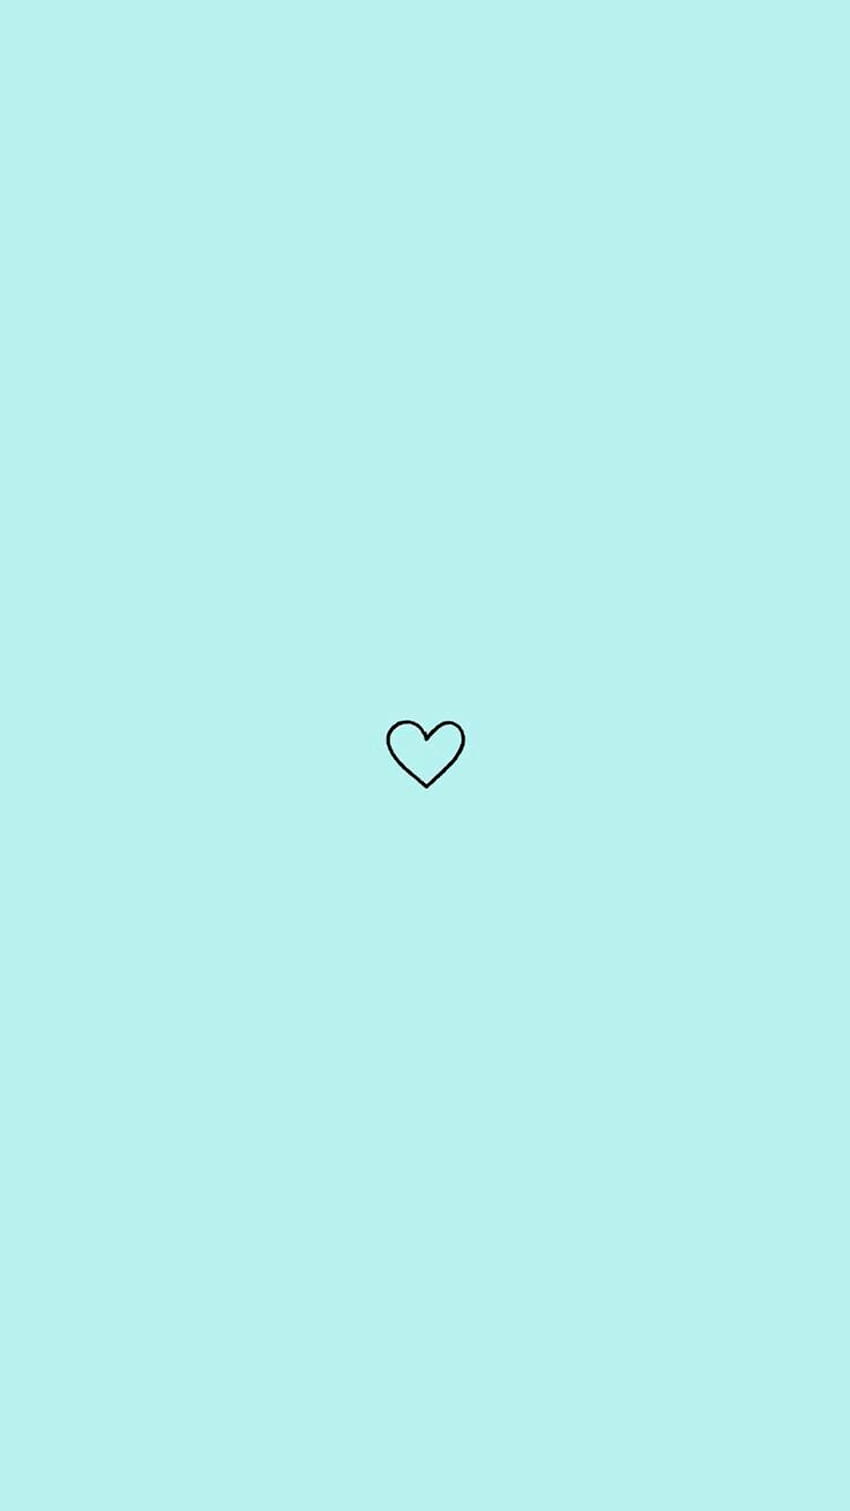 Minimalist blue background with a black heart in the middle - Teal